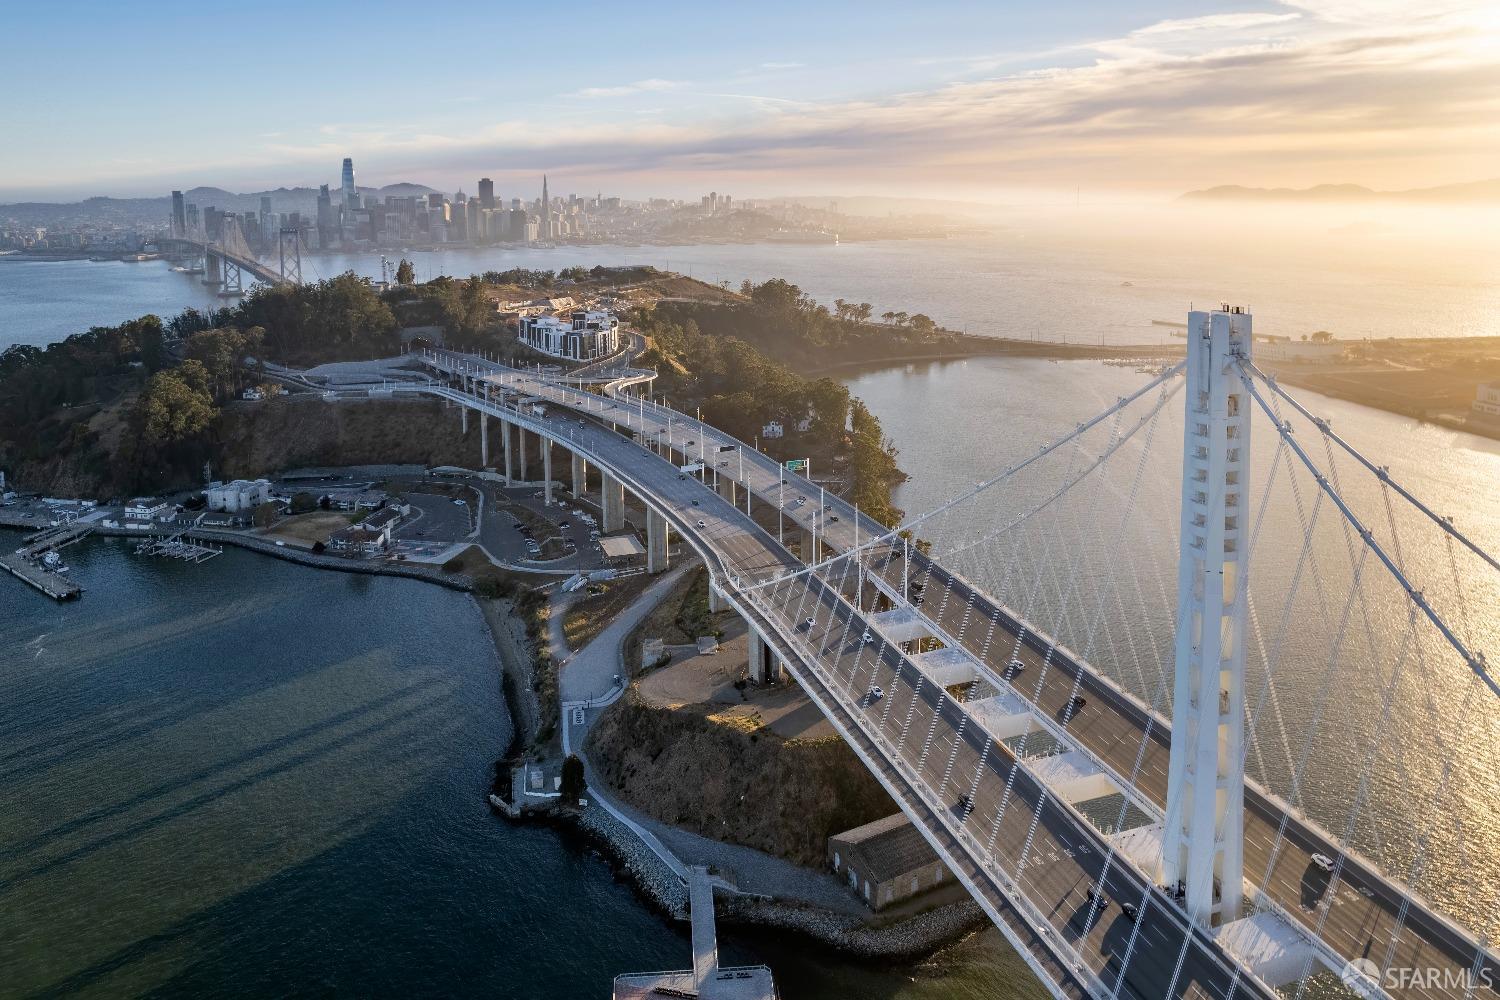 The Bristol Condominium is perched atop Yerba Buena Island, San Francisco's newest community, offering unparalleled views and a new way to experience life in San Francisco.